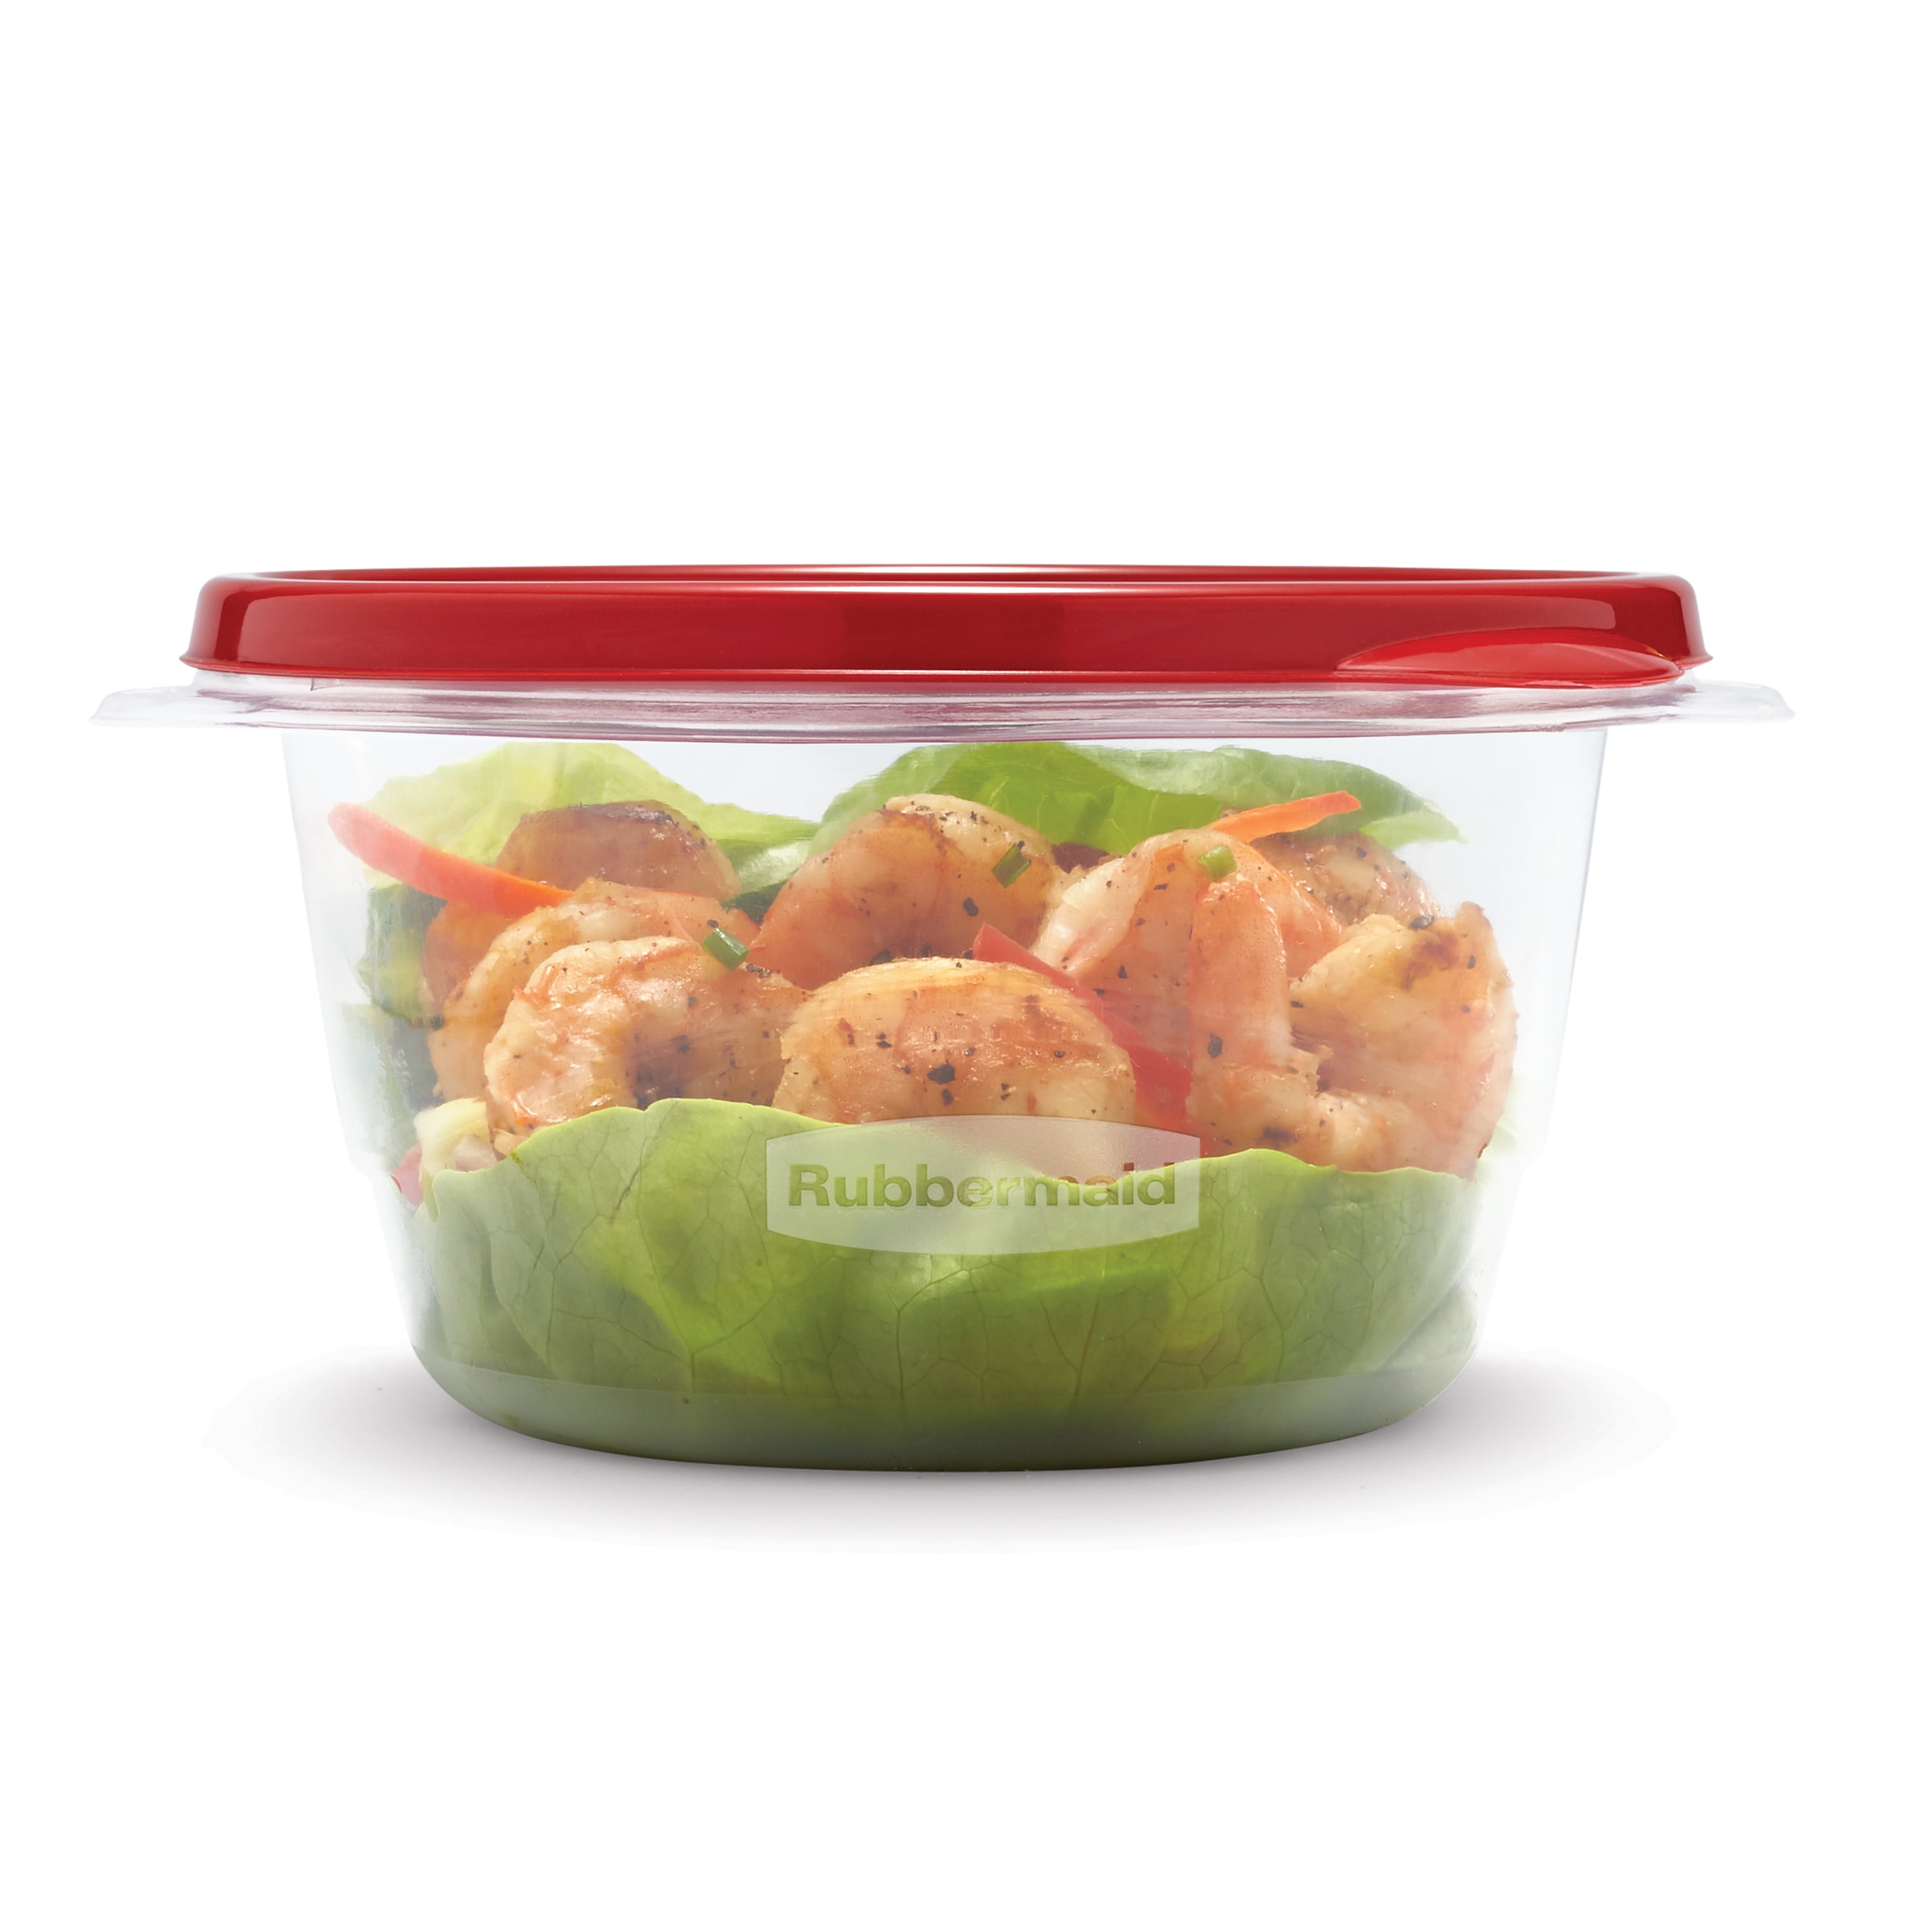 Rubbermaid TakeAlongs Small Bowl Food Storage Containers, 3.2 Cup, 2 Count  (Pack of 3) Total 6 Containers